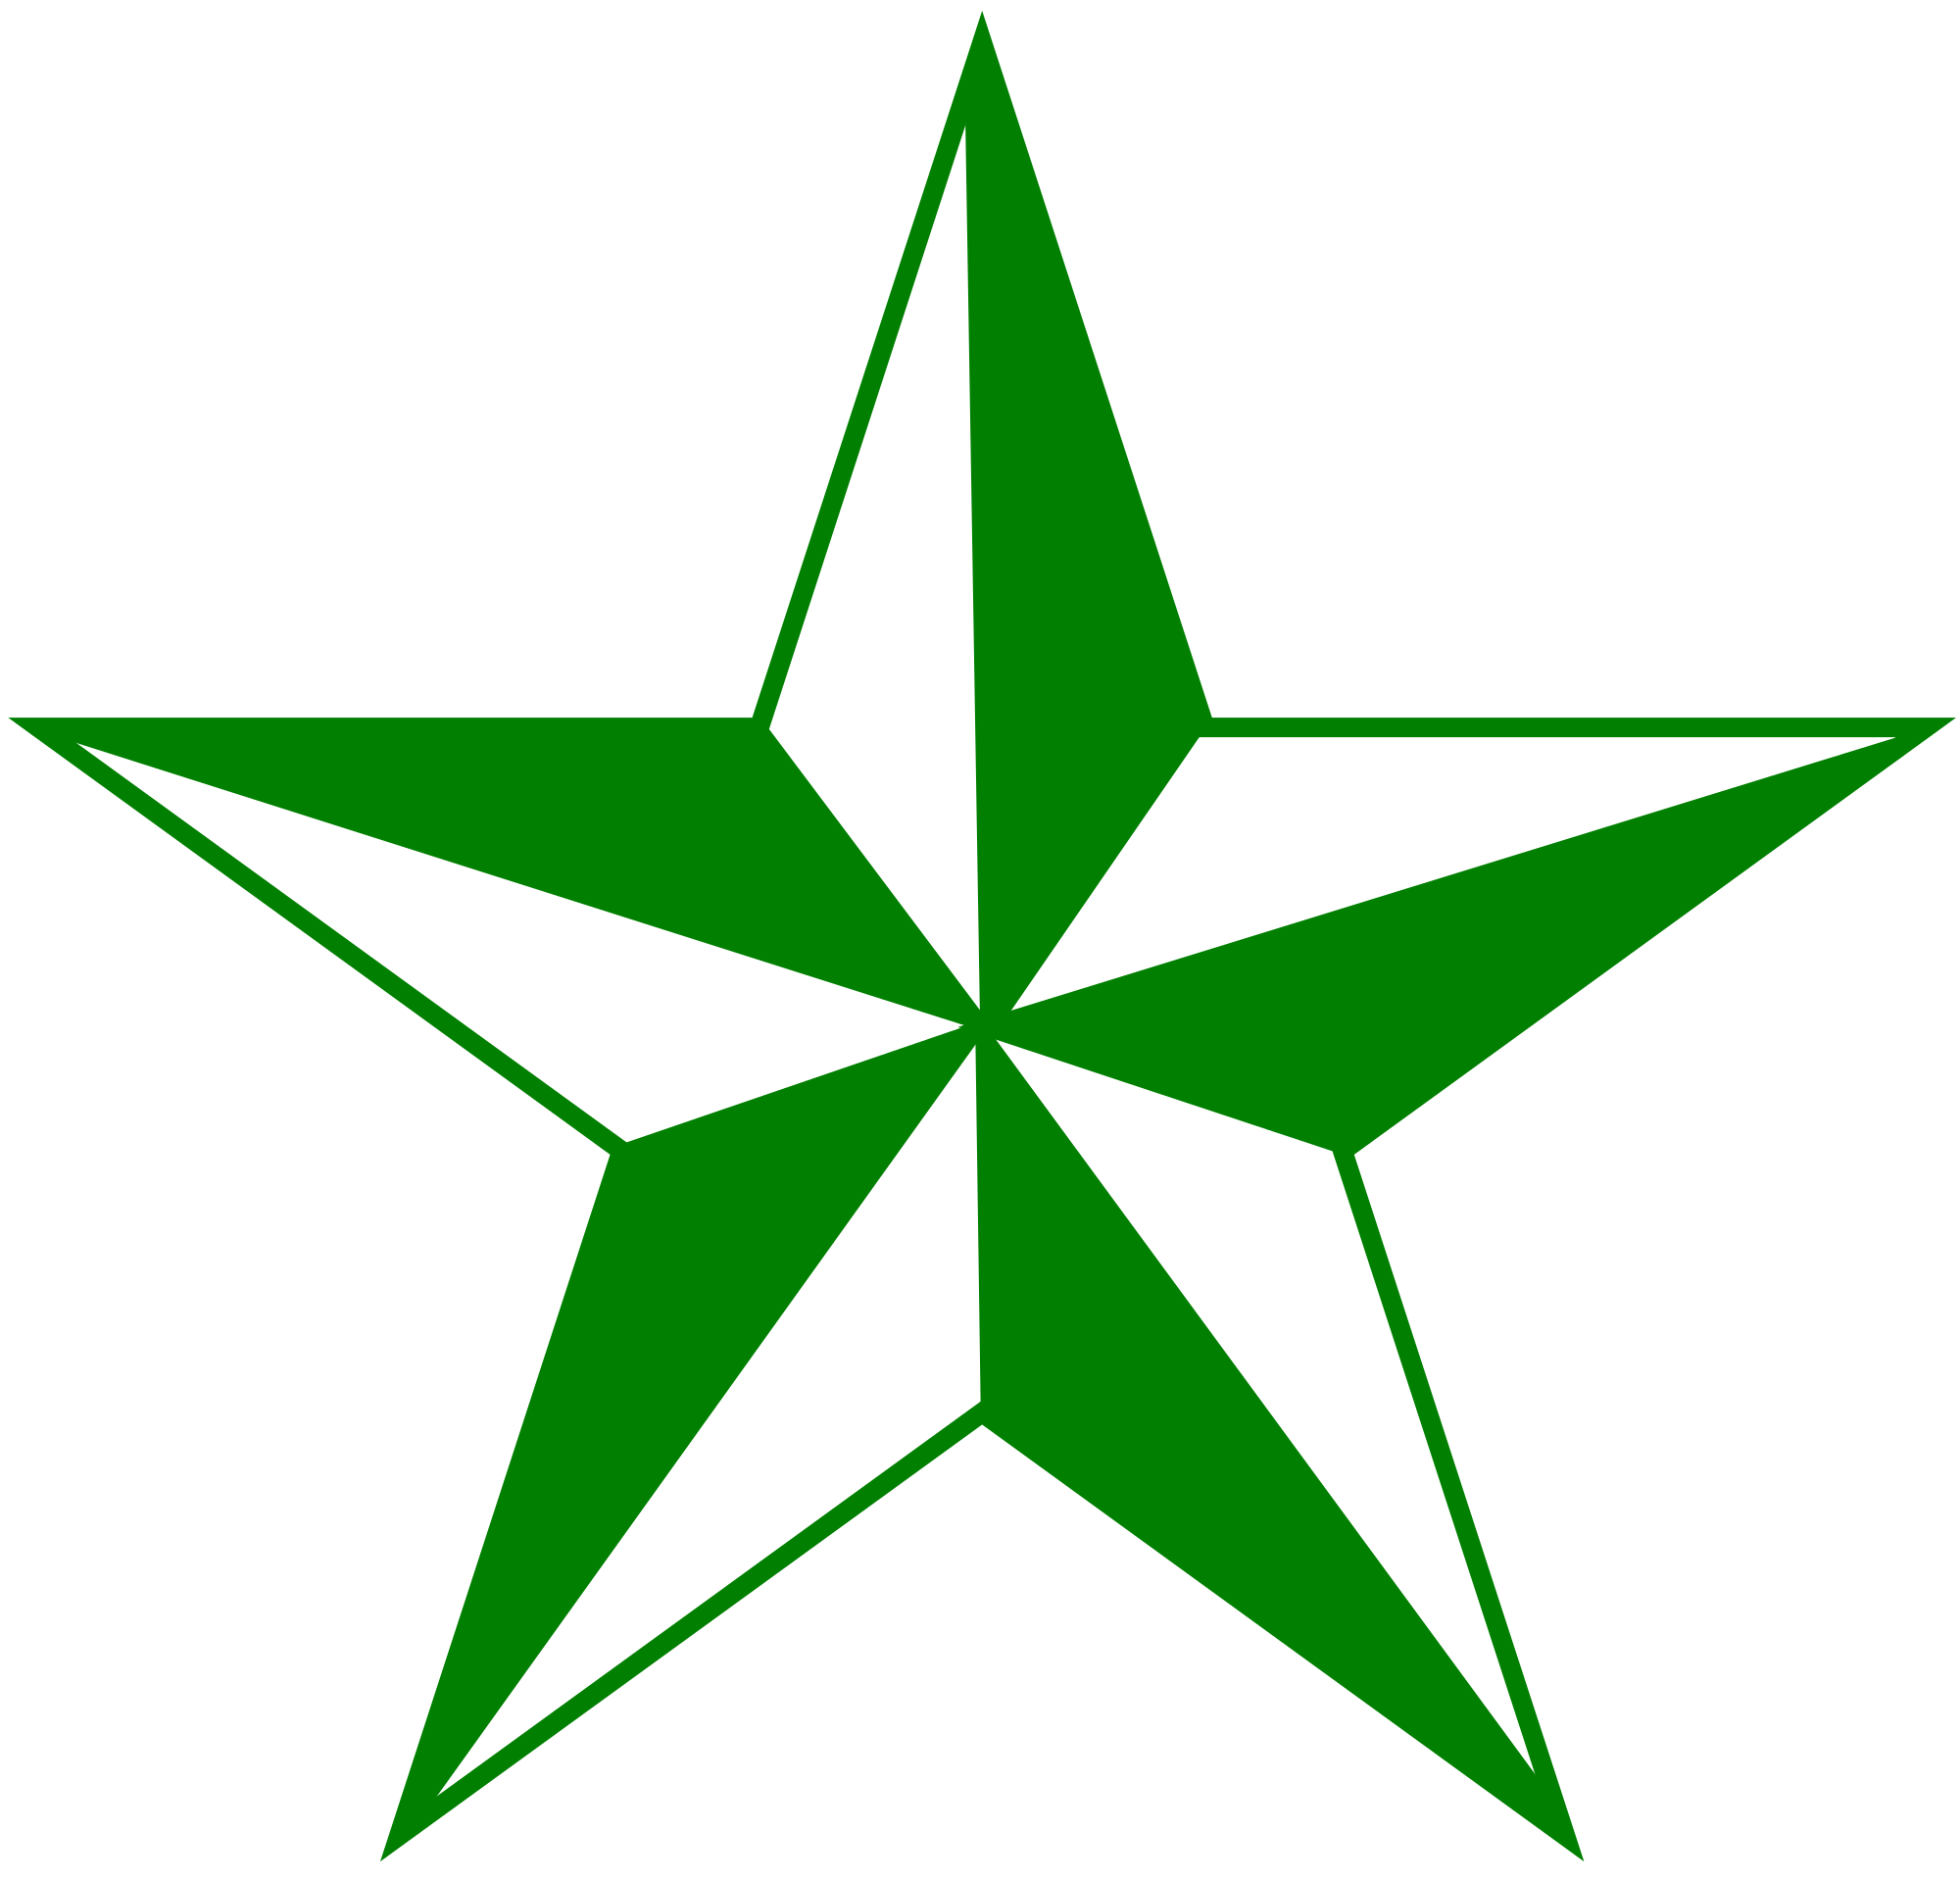 Green archers png 7 » PNG Image.